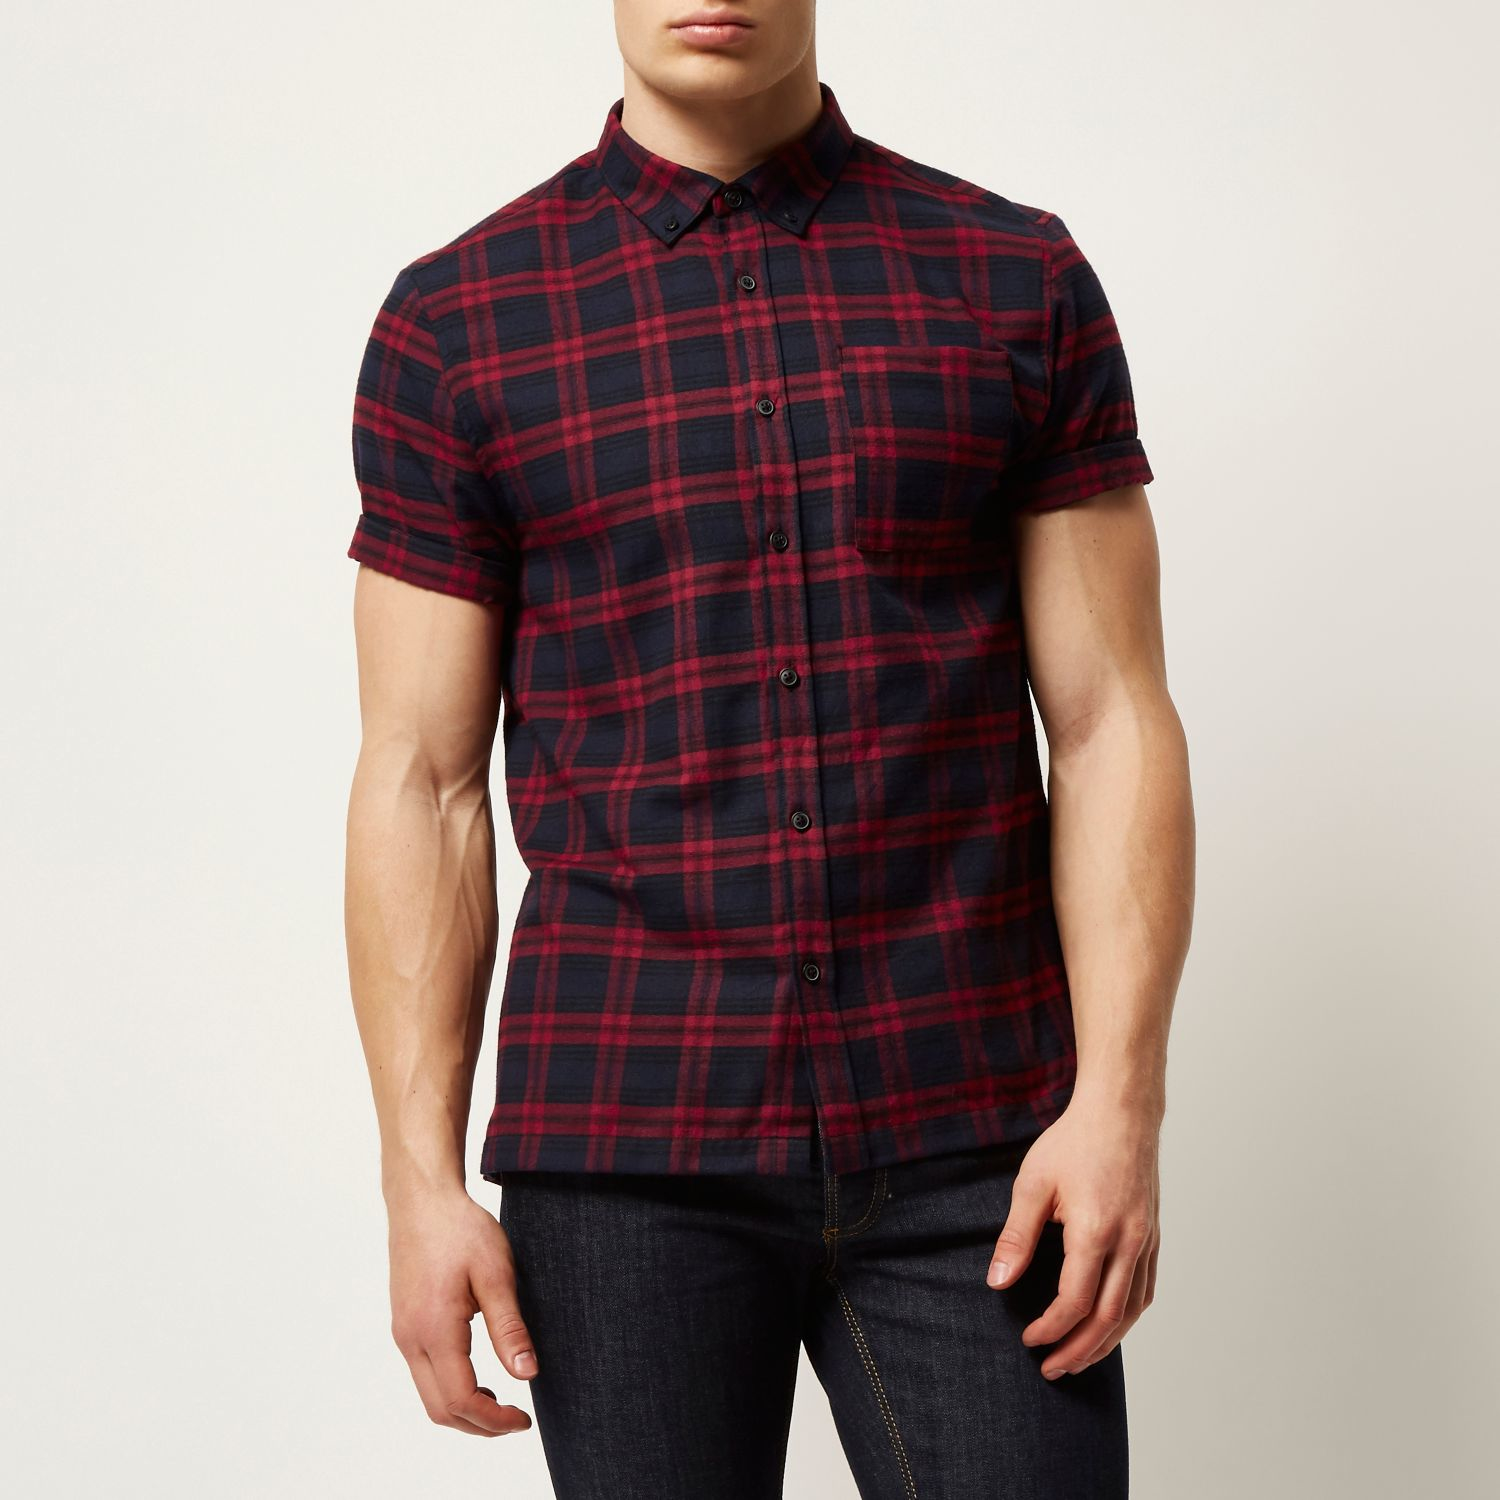 River Island Navy Check Flannel Short Sleeve Shirt in Blue for Men - Lyst